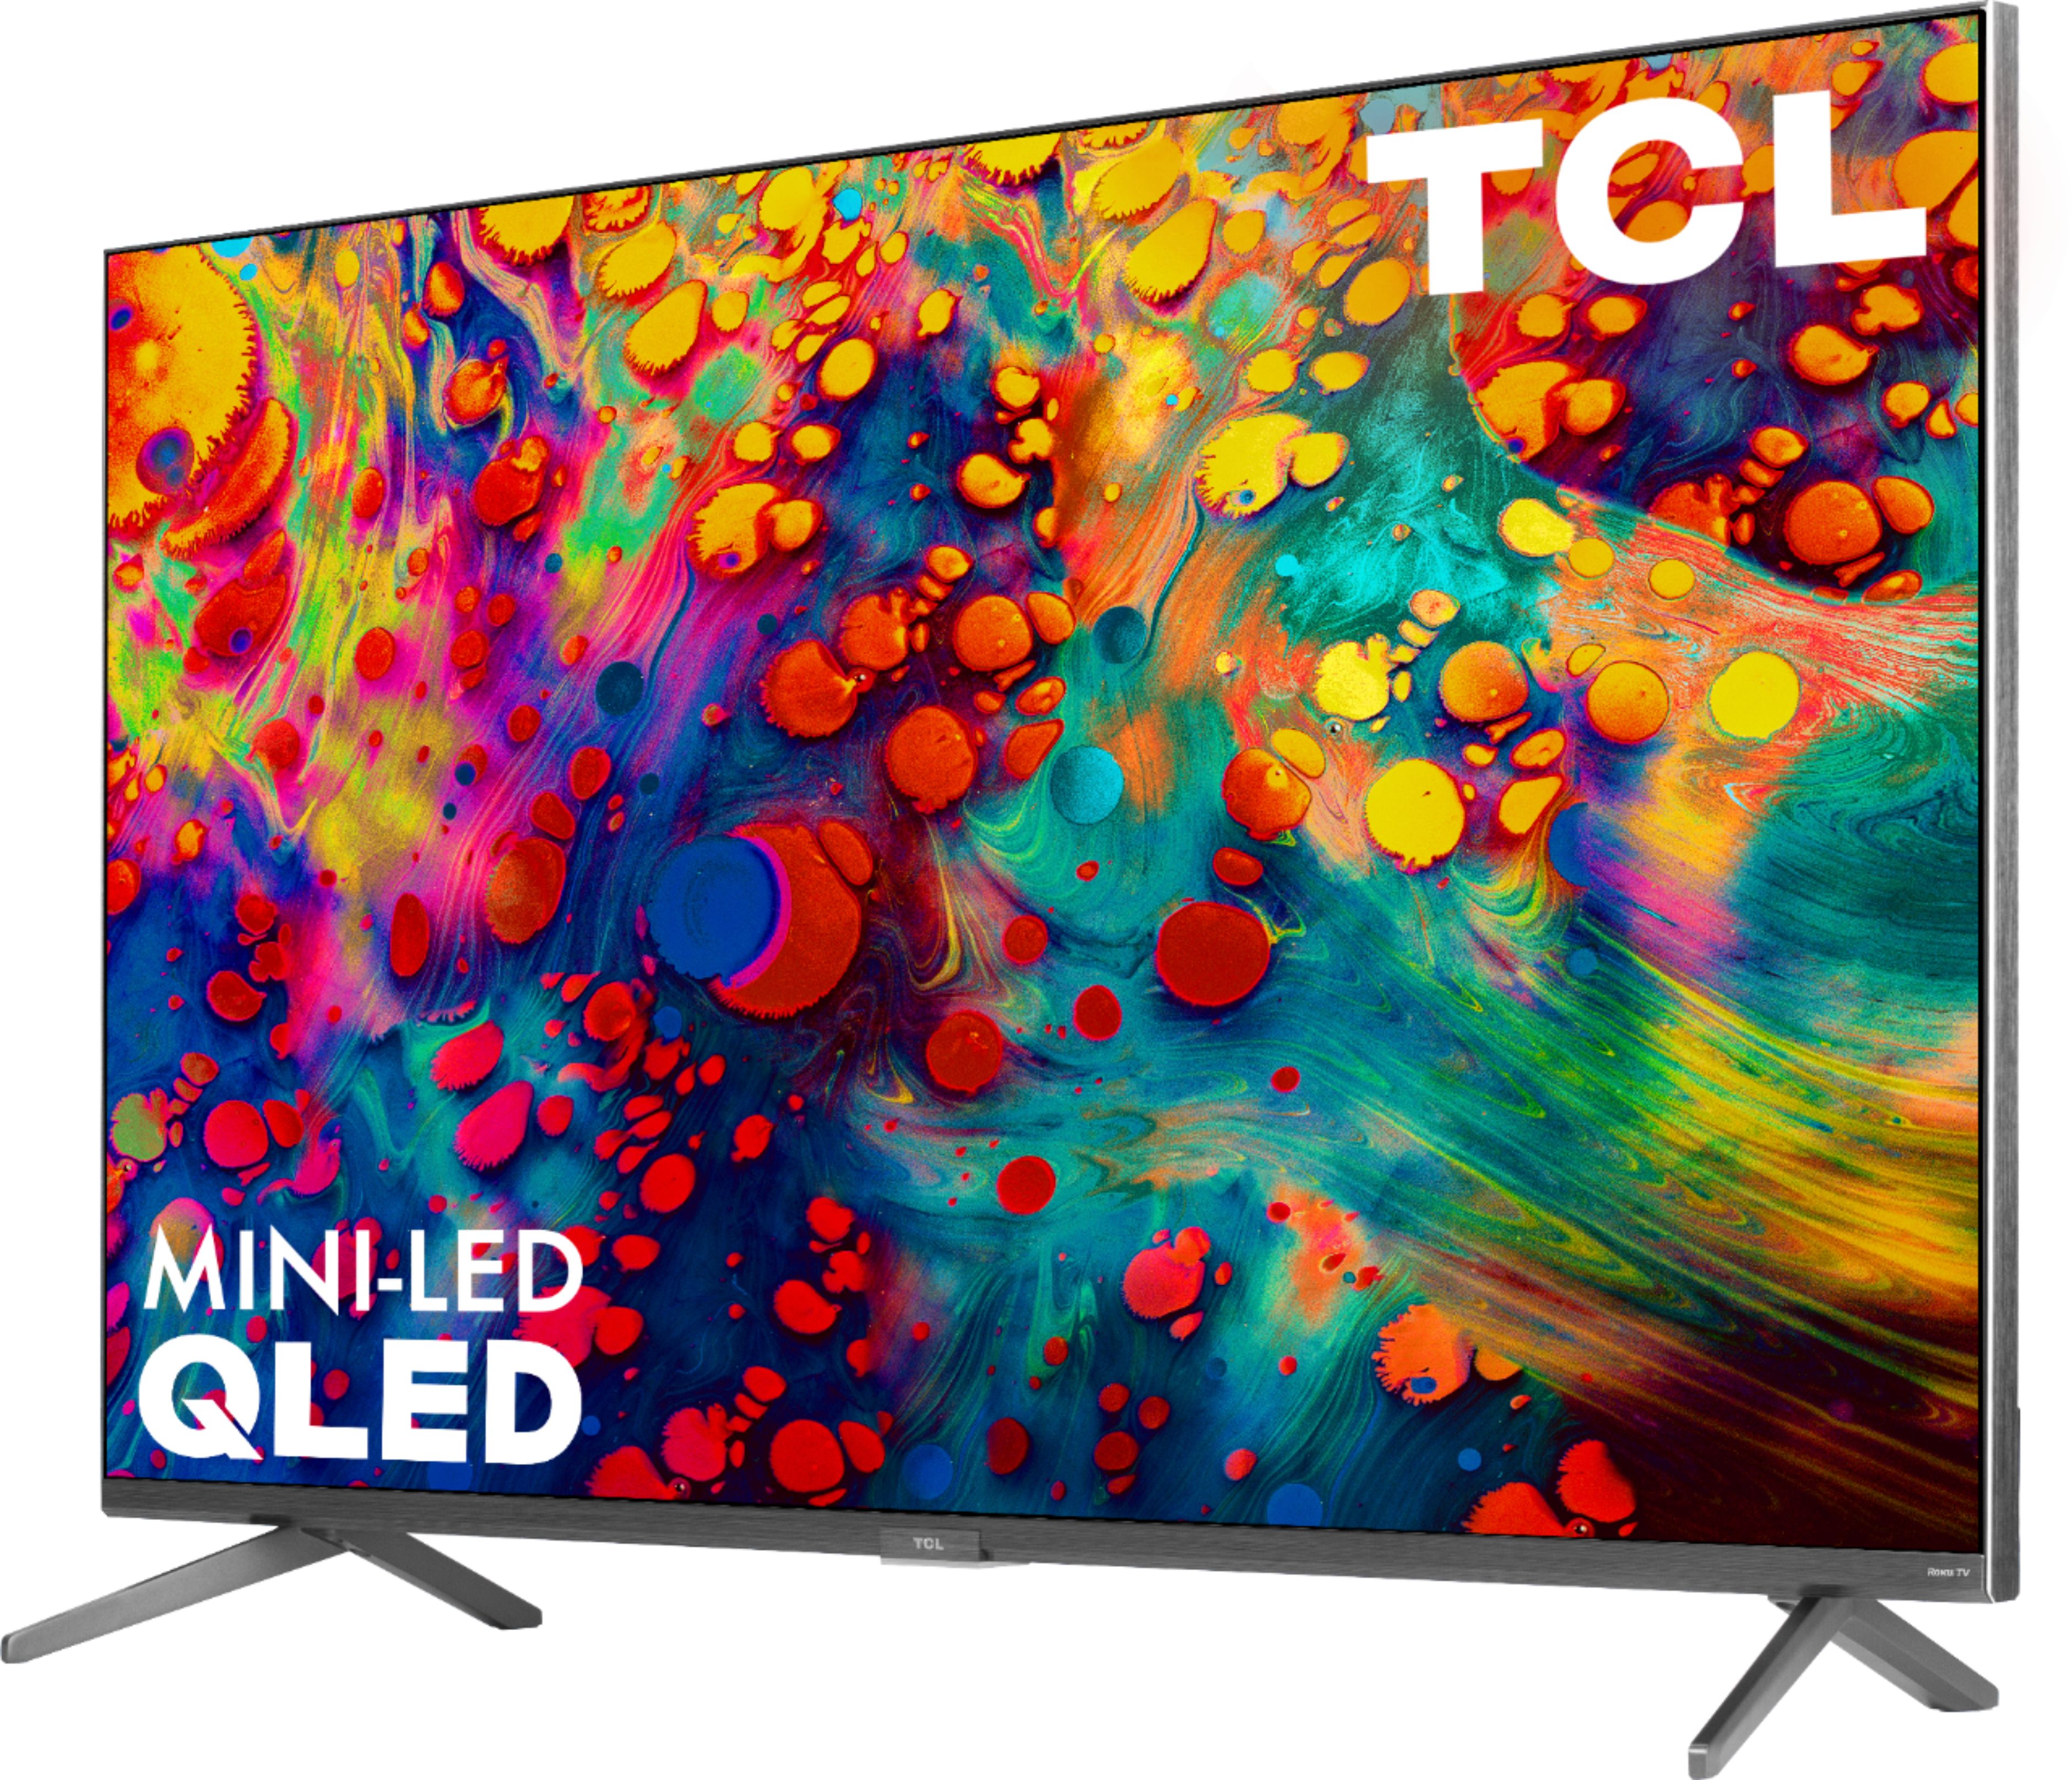 Left View: TCL - 55” Class 6-Series 4K UHD Mini-LED QLED Dolby Vision HDR Roku Smart TV - 55R635